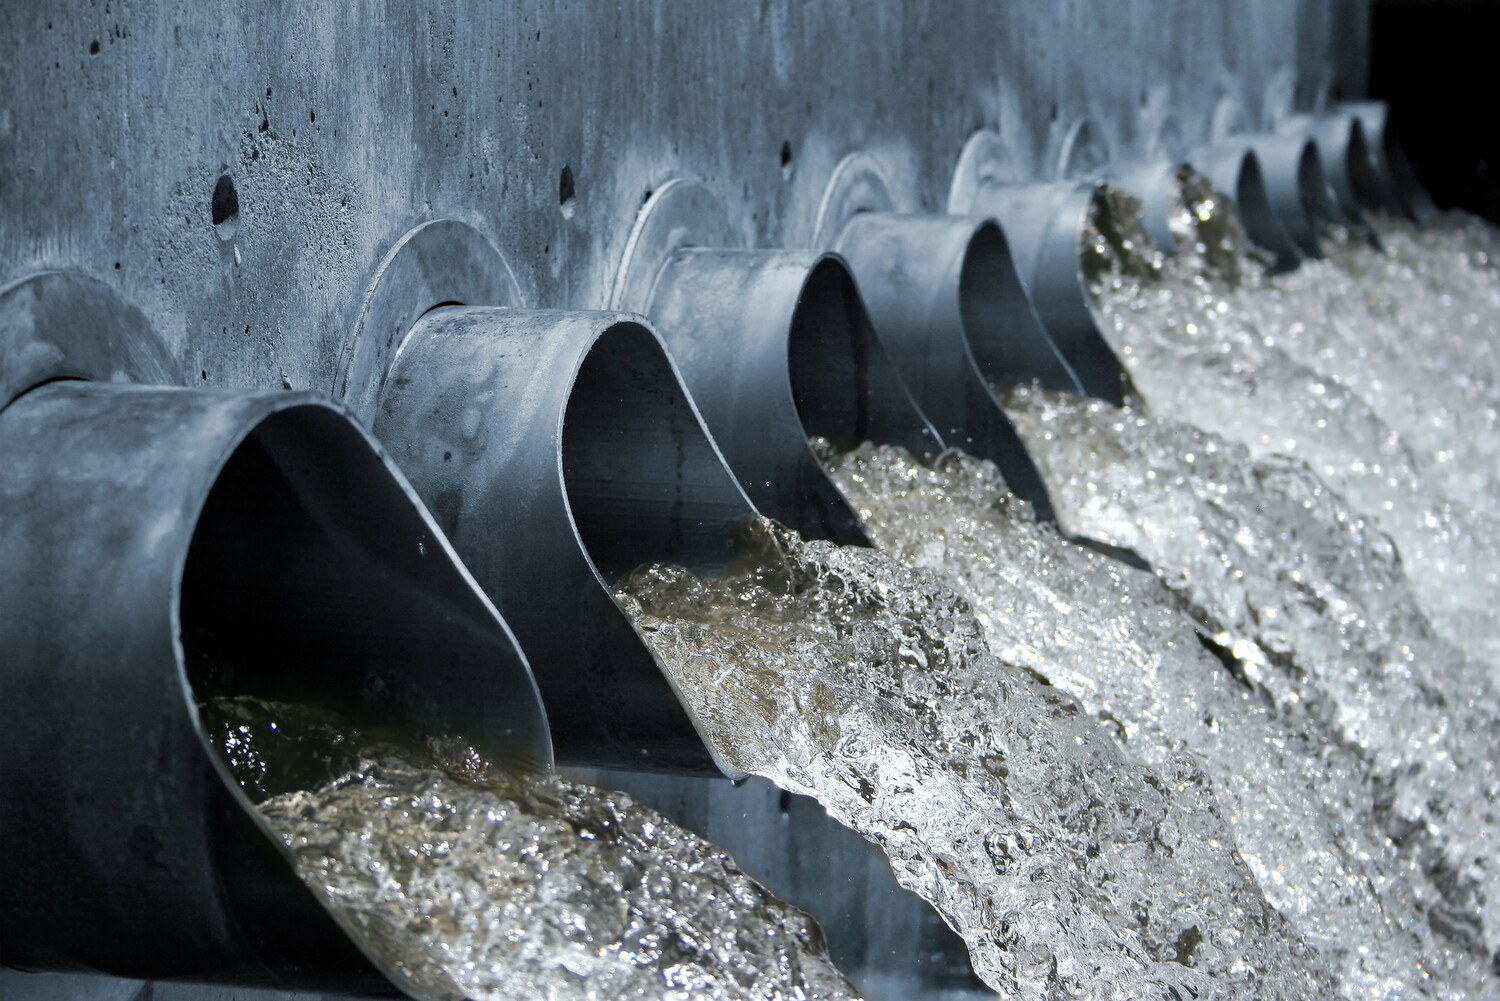 stock photo of rushing water at a wastewater treatment facility